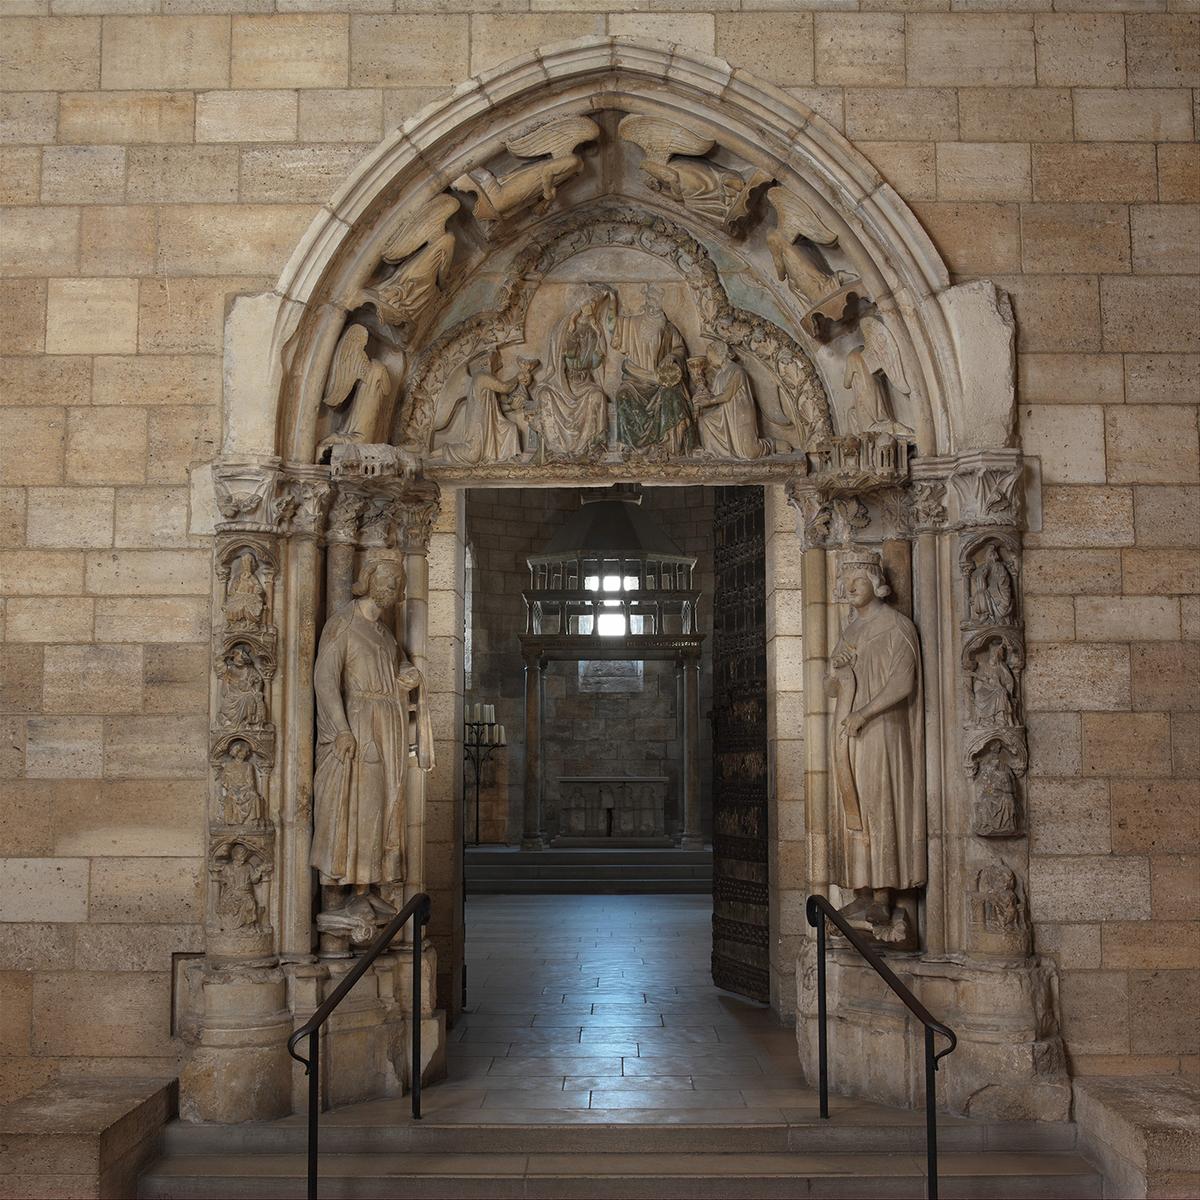 Doorway from Moutiers-Saint-Jean, circa 1250, made in Burgundy, France. The Cloisters Collection, The Metropolitan Museum of Art, New York City. (Public Domain)